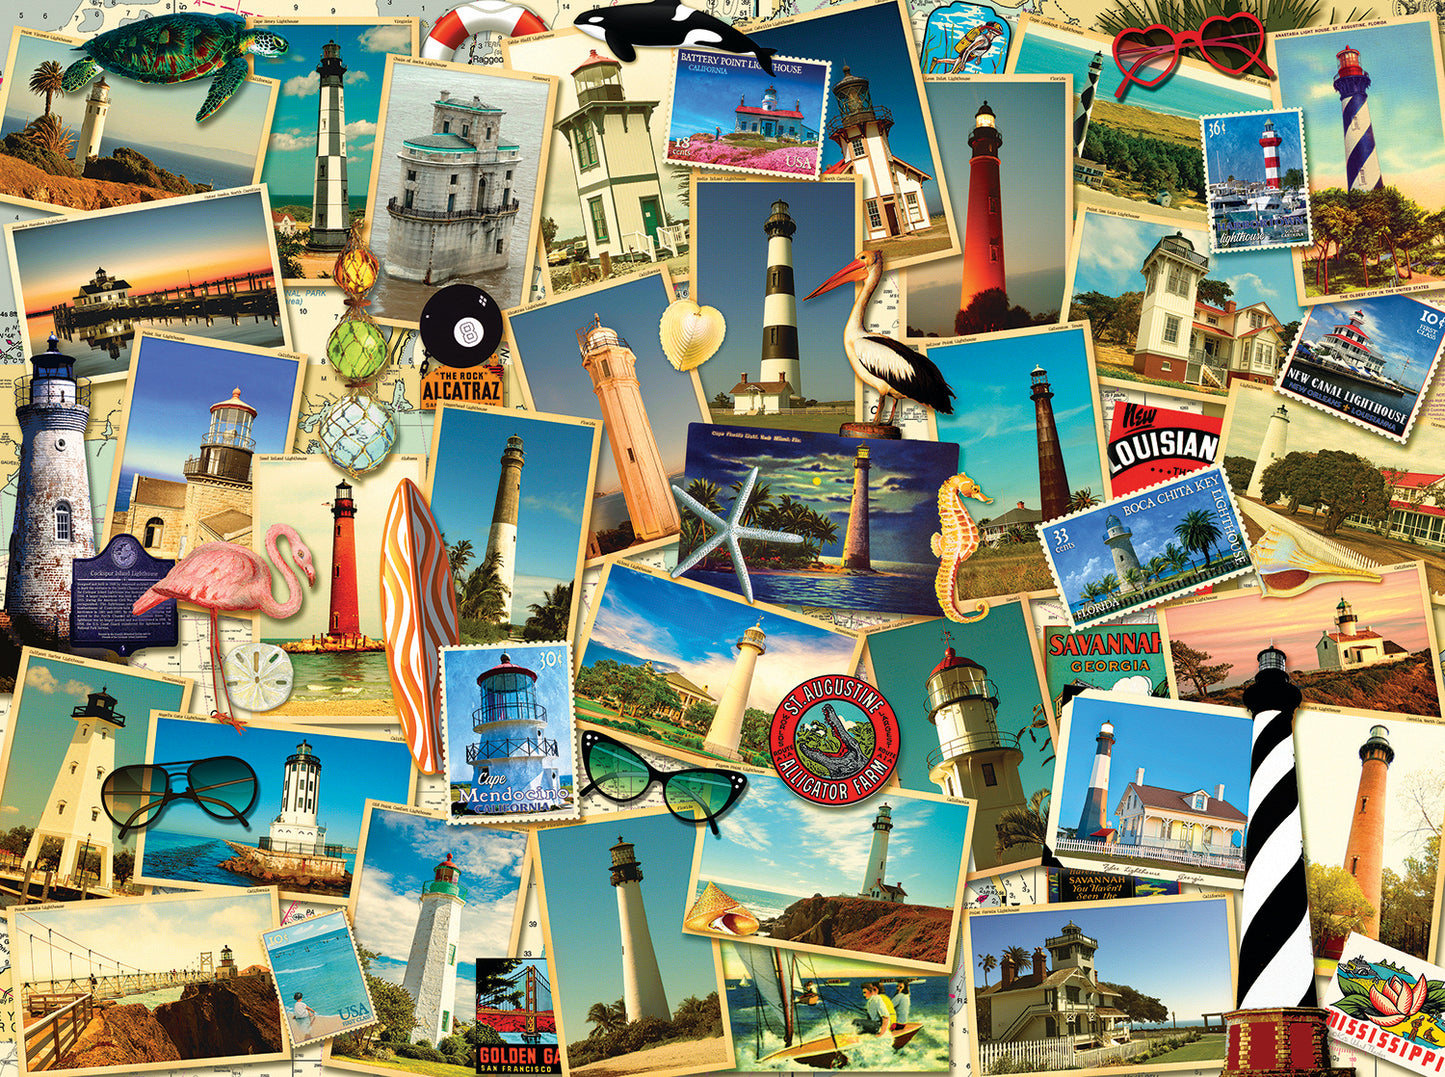 Southern Lighthouses - 1000 Piece Jigsaw Puzzle